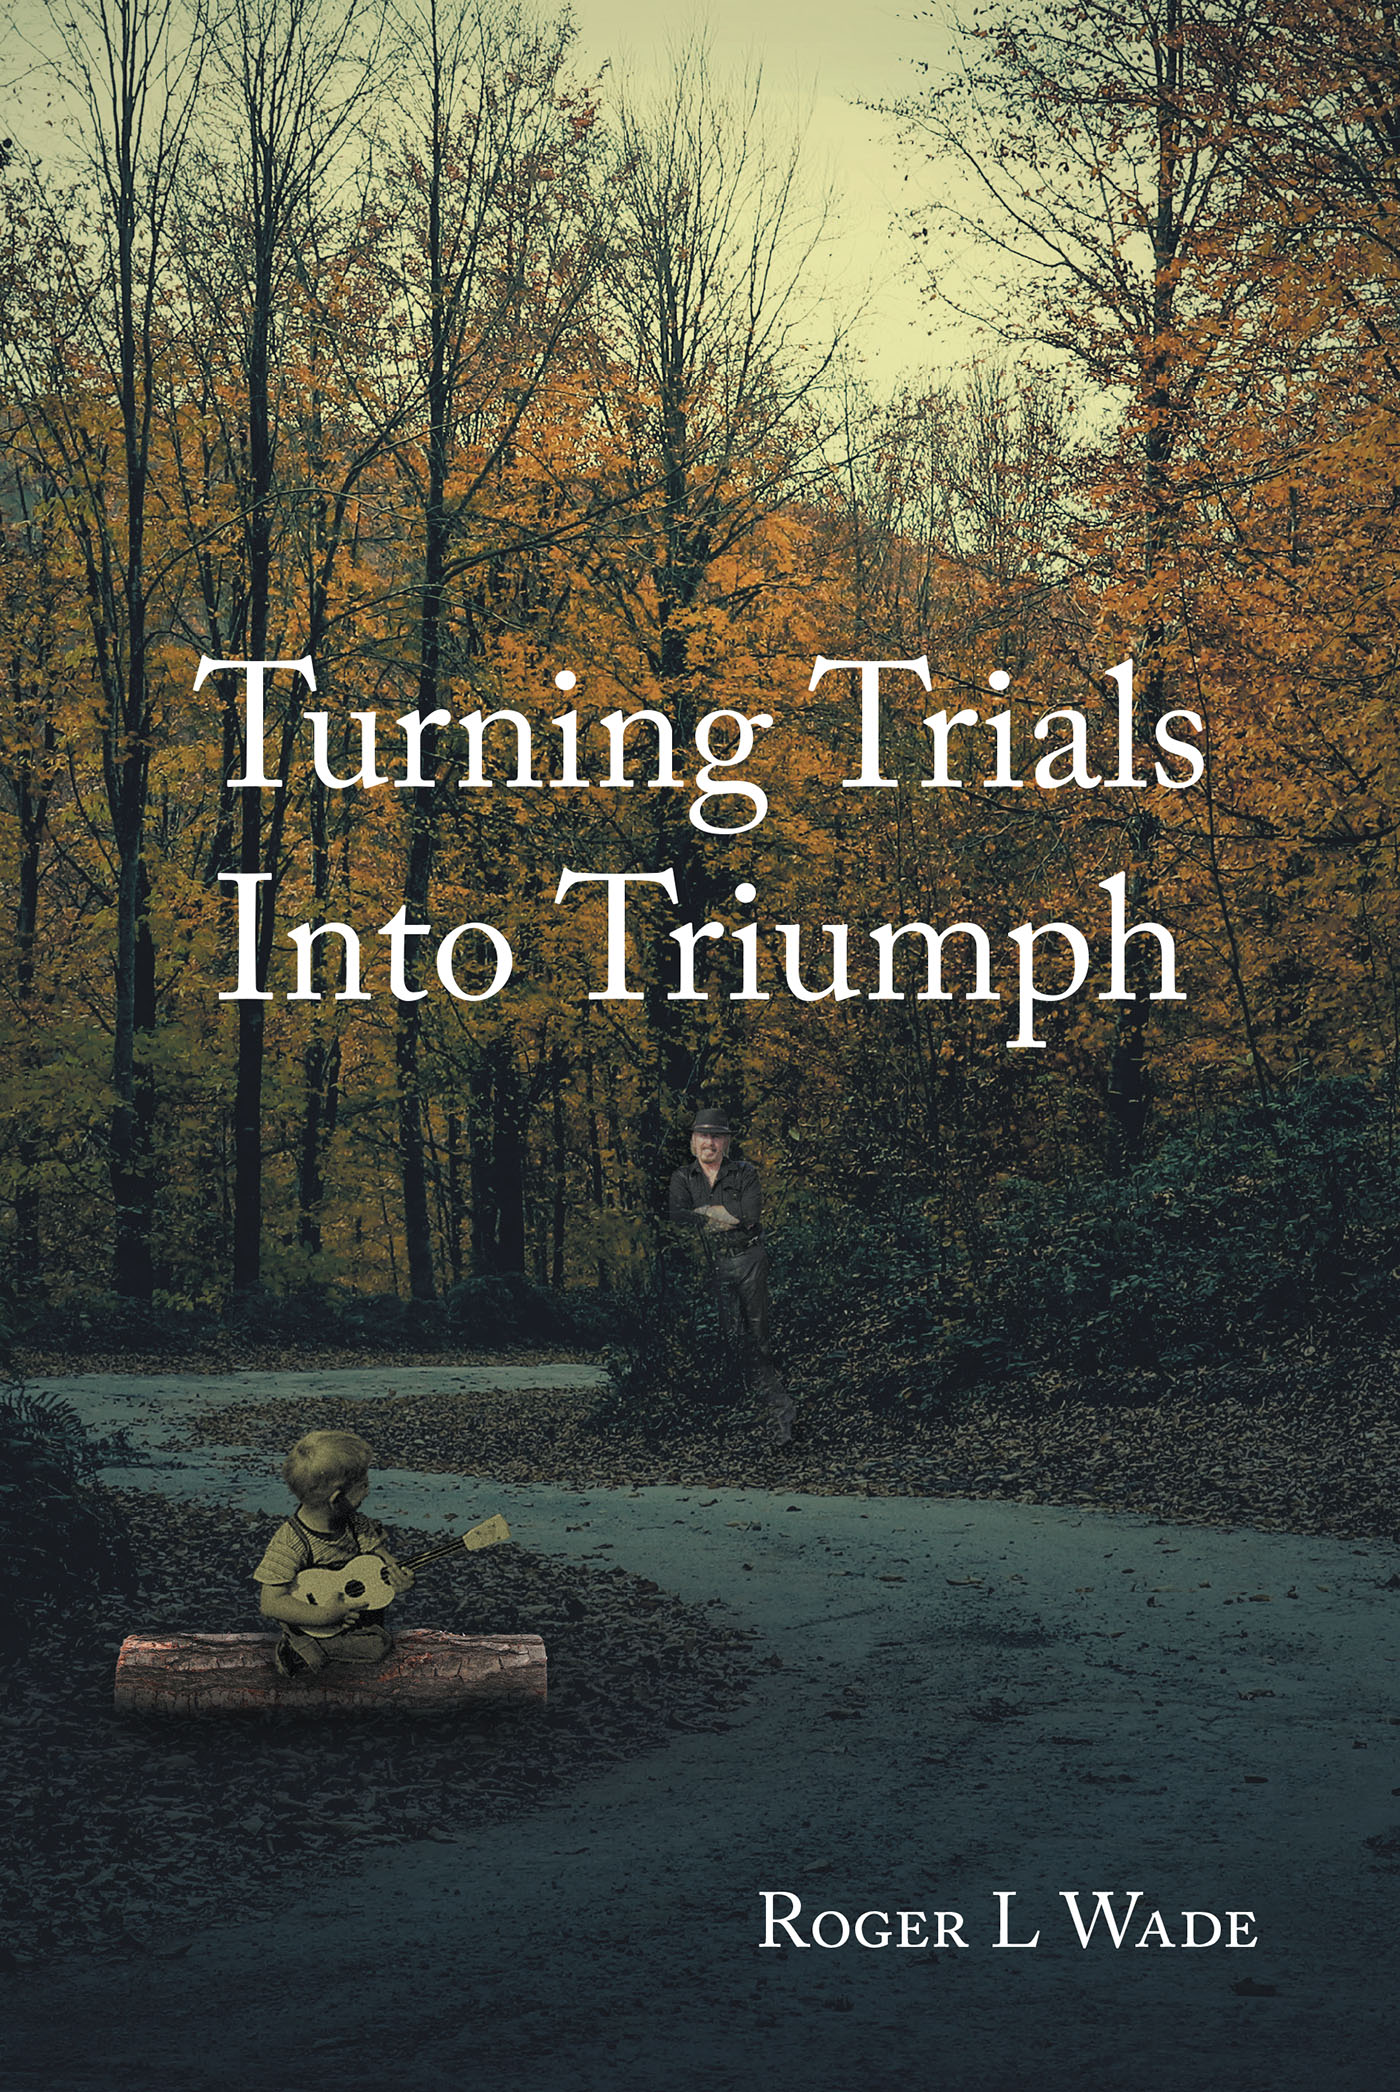 Roger L. Wade’s Newly Released "Turning Trials Into Triumph" is a Thoughtful Memoir That Explores the Author’s Most Cherished and Challenging Moments